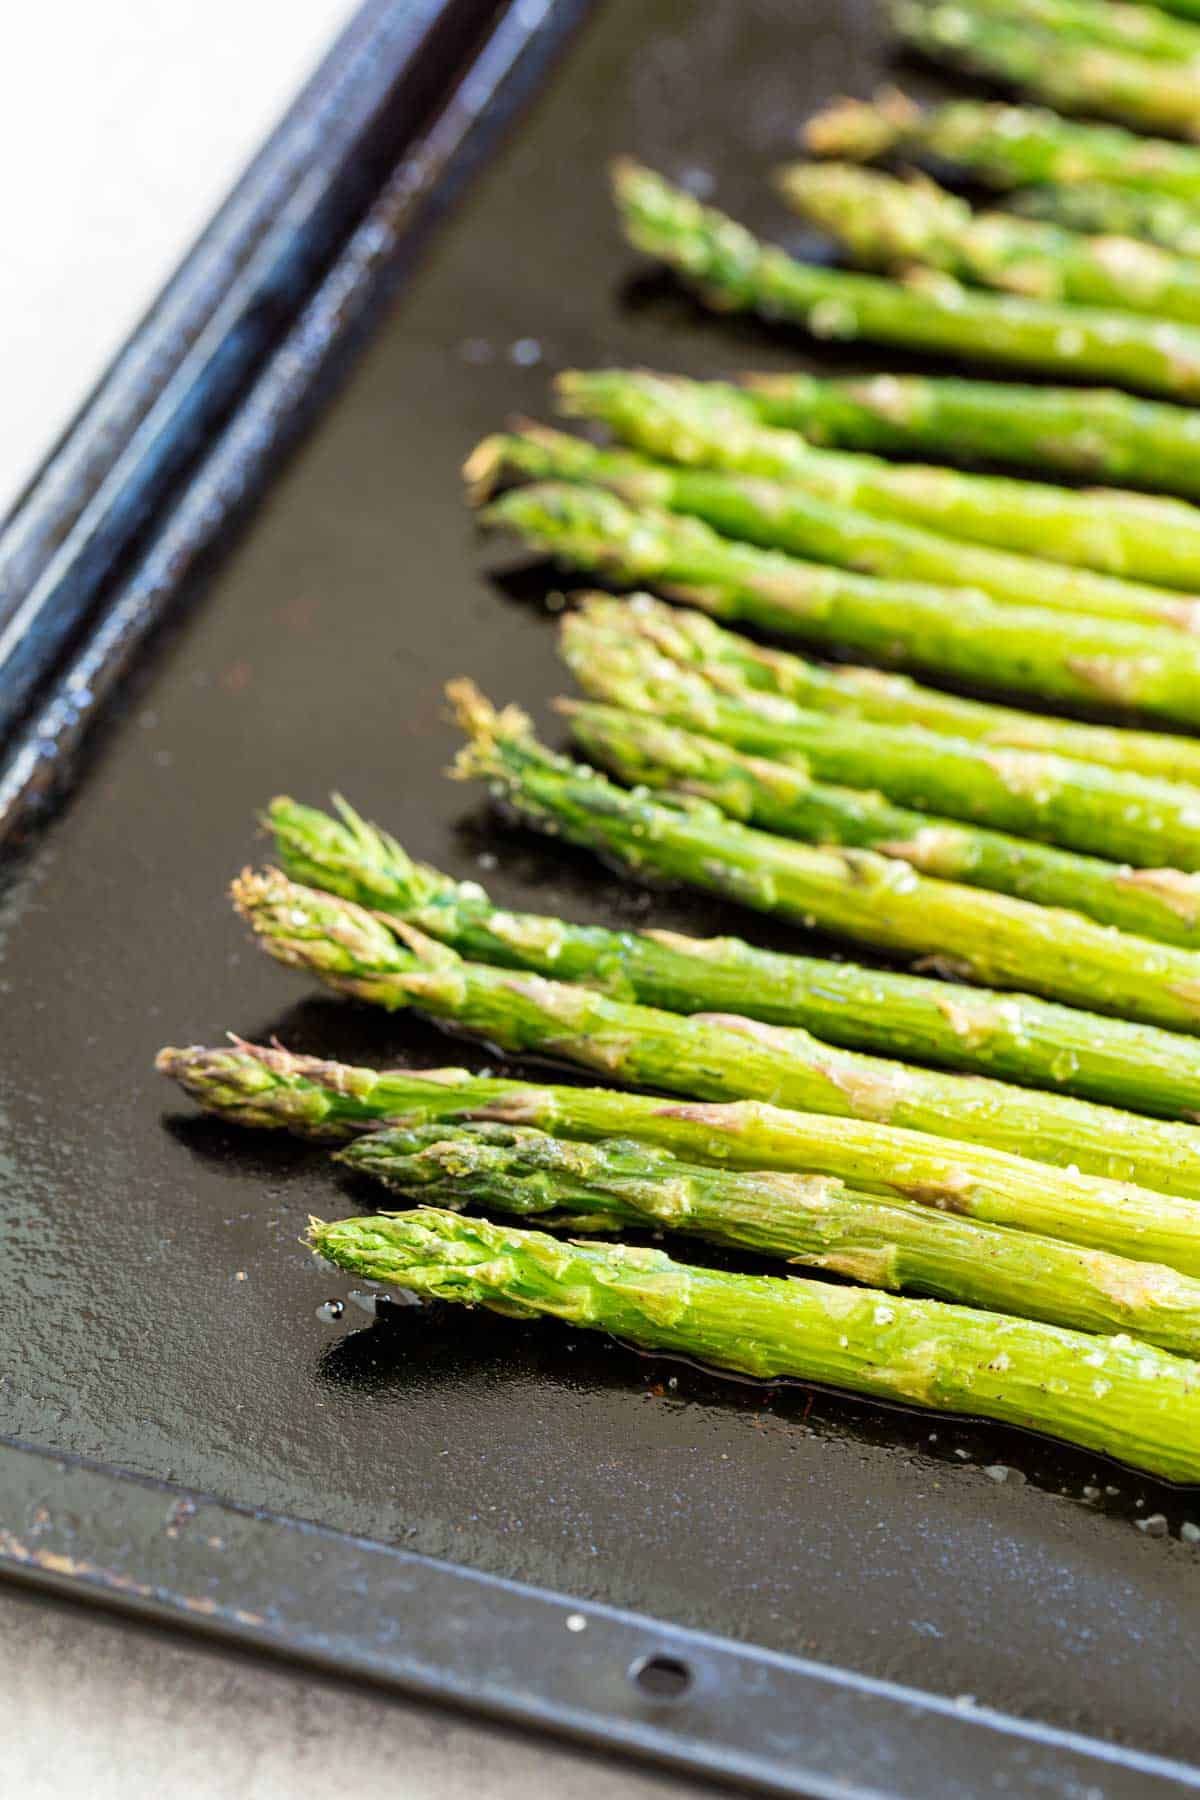 Spears of roasted asparagus on a black oiled baking sheet.